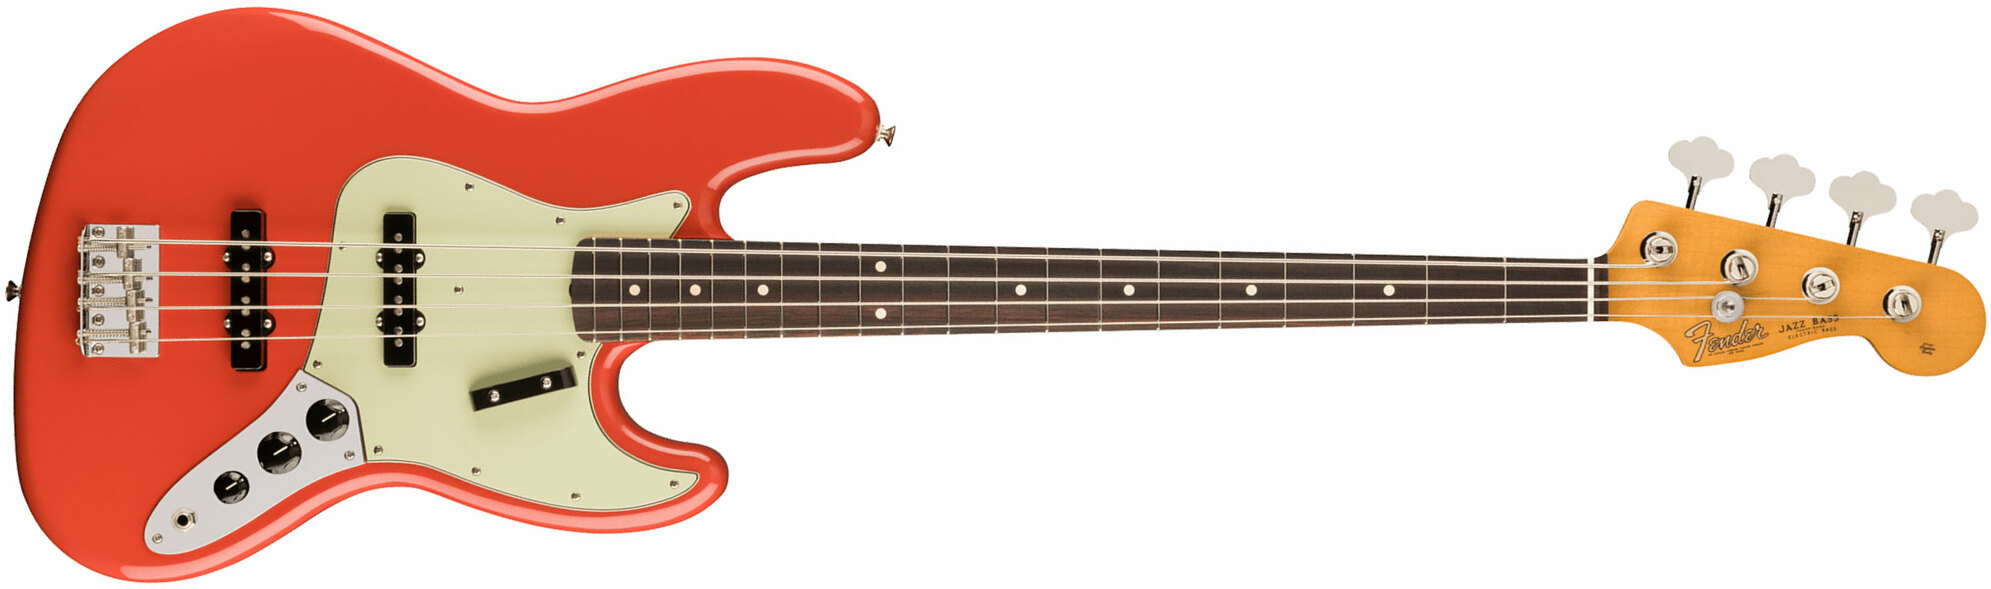 Fender Jazz Bass 60s Vintera Ii Mex Rw - Fiesta Red - Solid body electric bass - Main picture